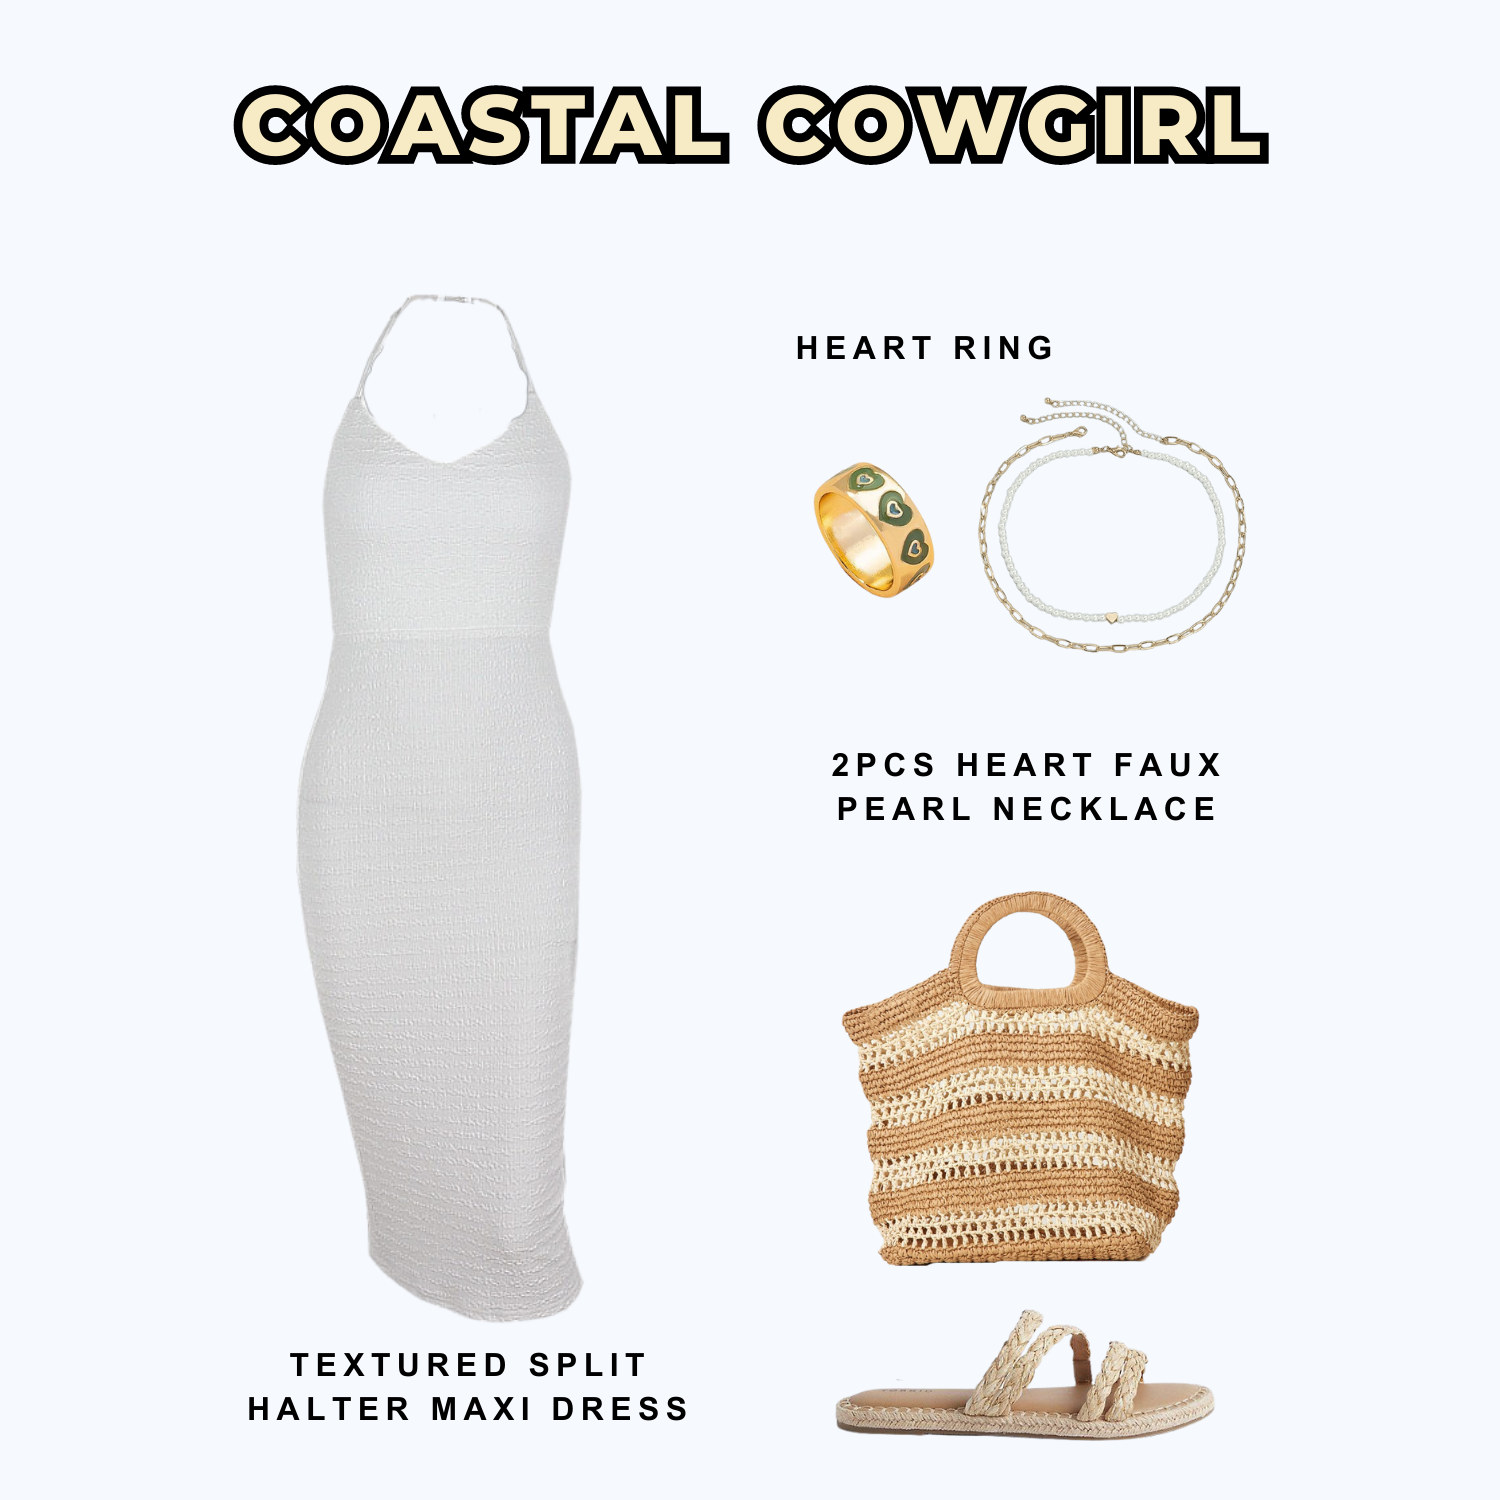 Coastal Cowgirl look 3 - AnotherChill